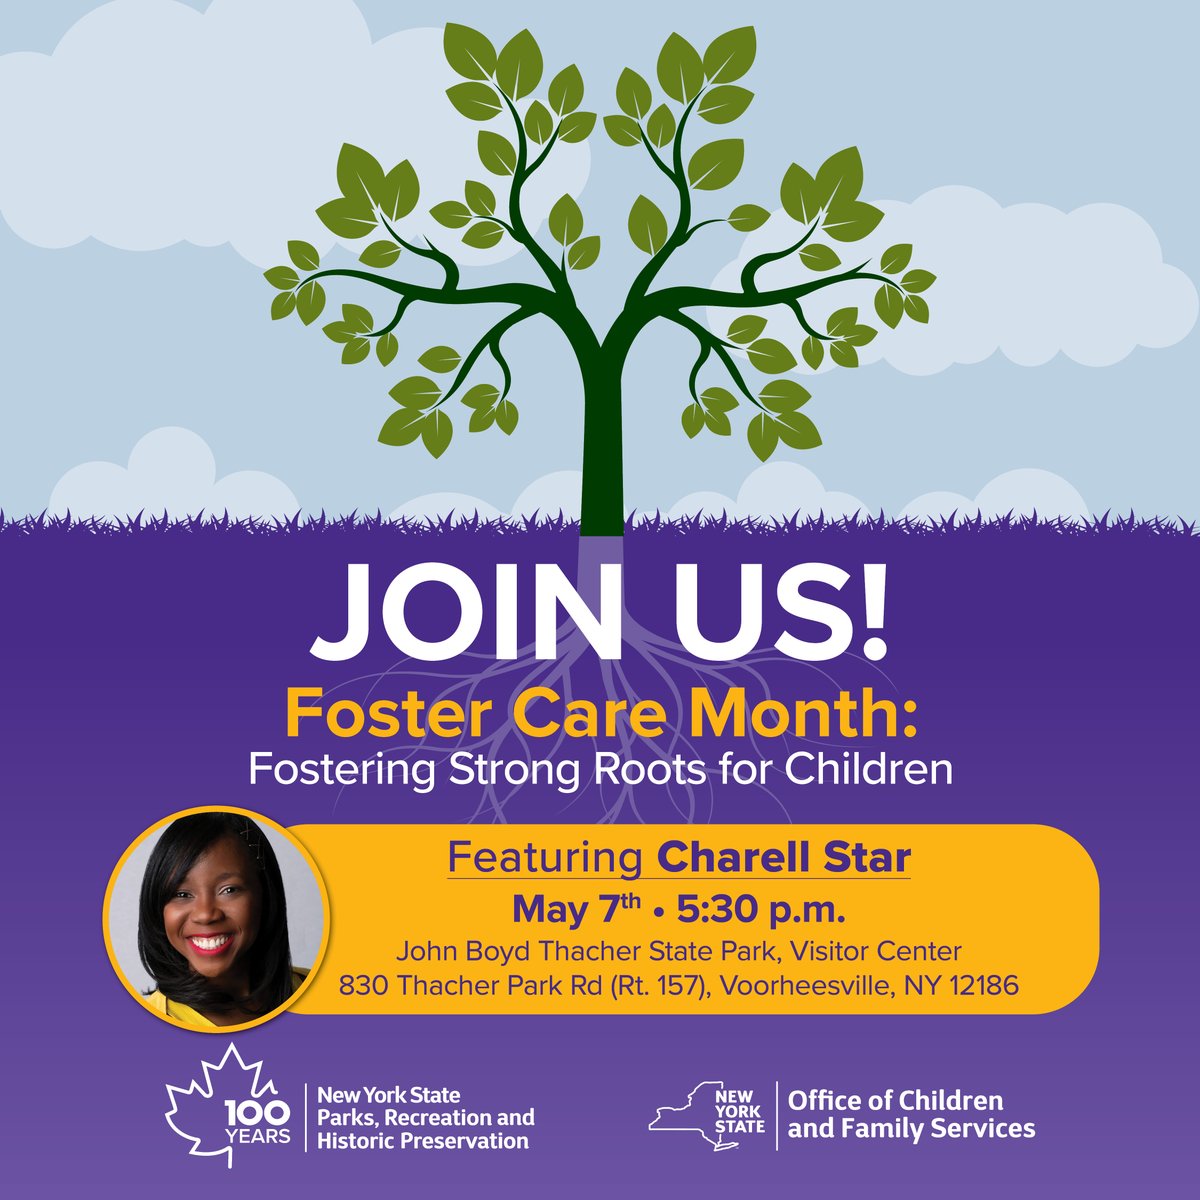 Learn how you can become a foster parent and hear from advocate @CharellStar about ways to promote strong roots for children! #fosteringstrongroots #fostercaremonth